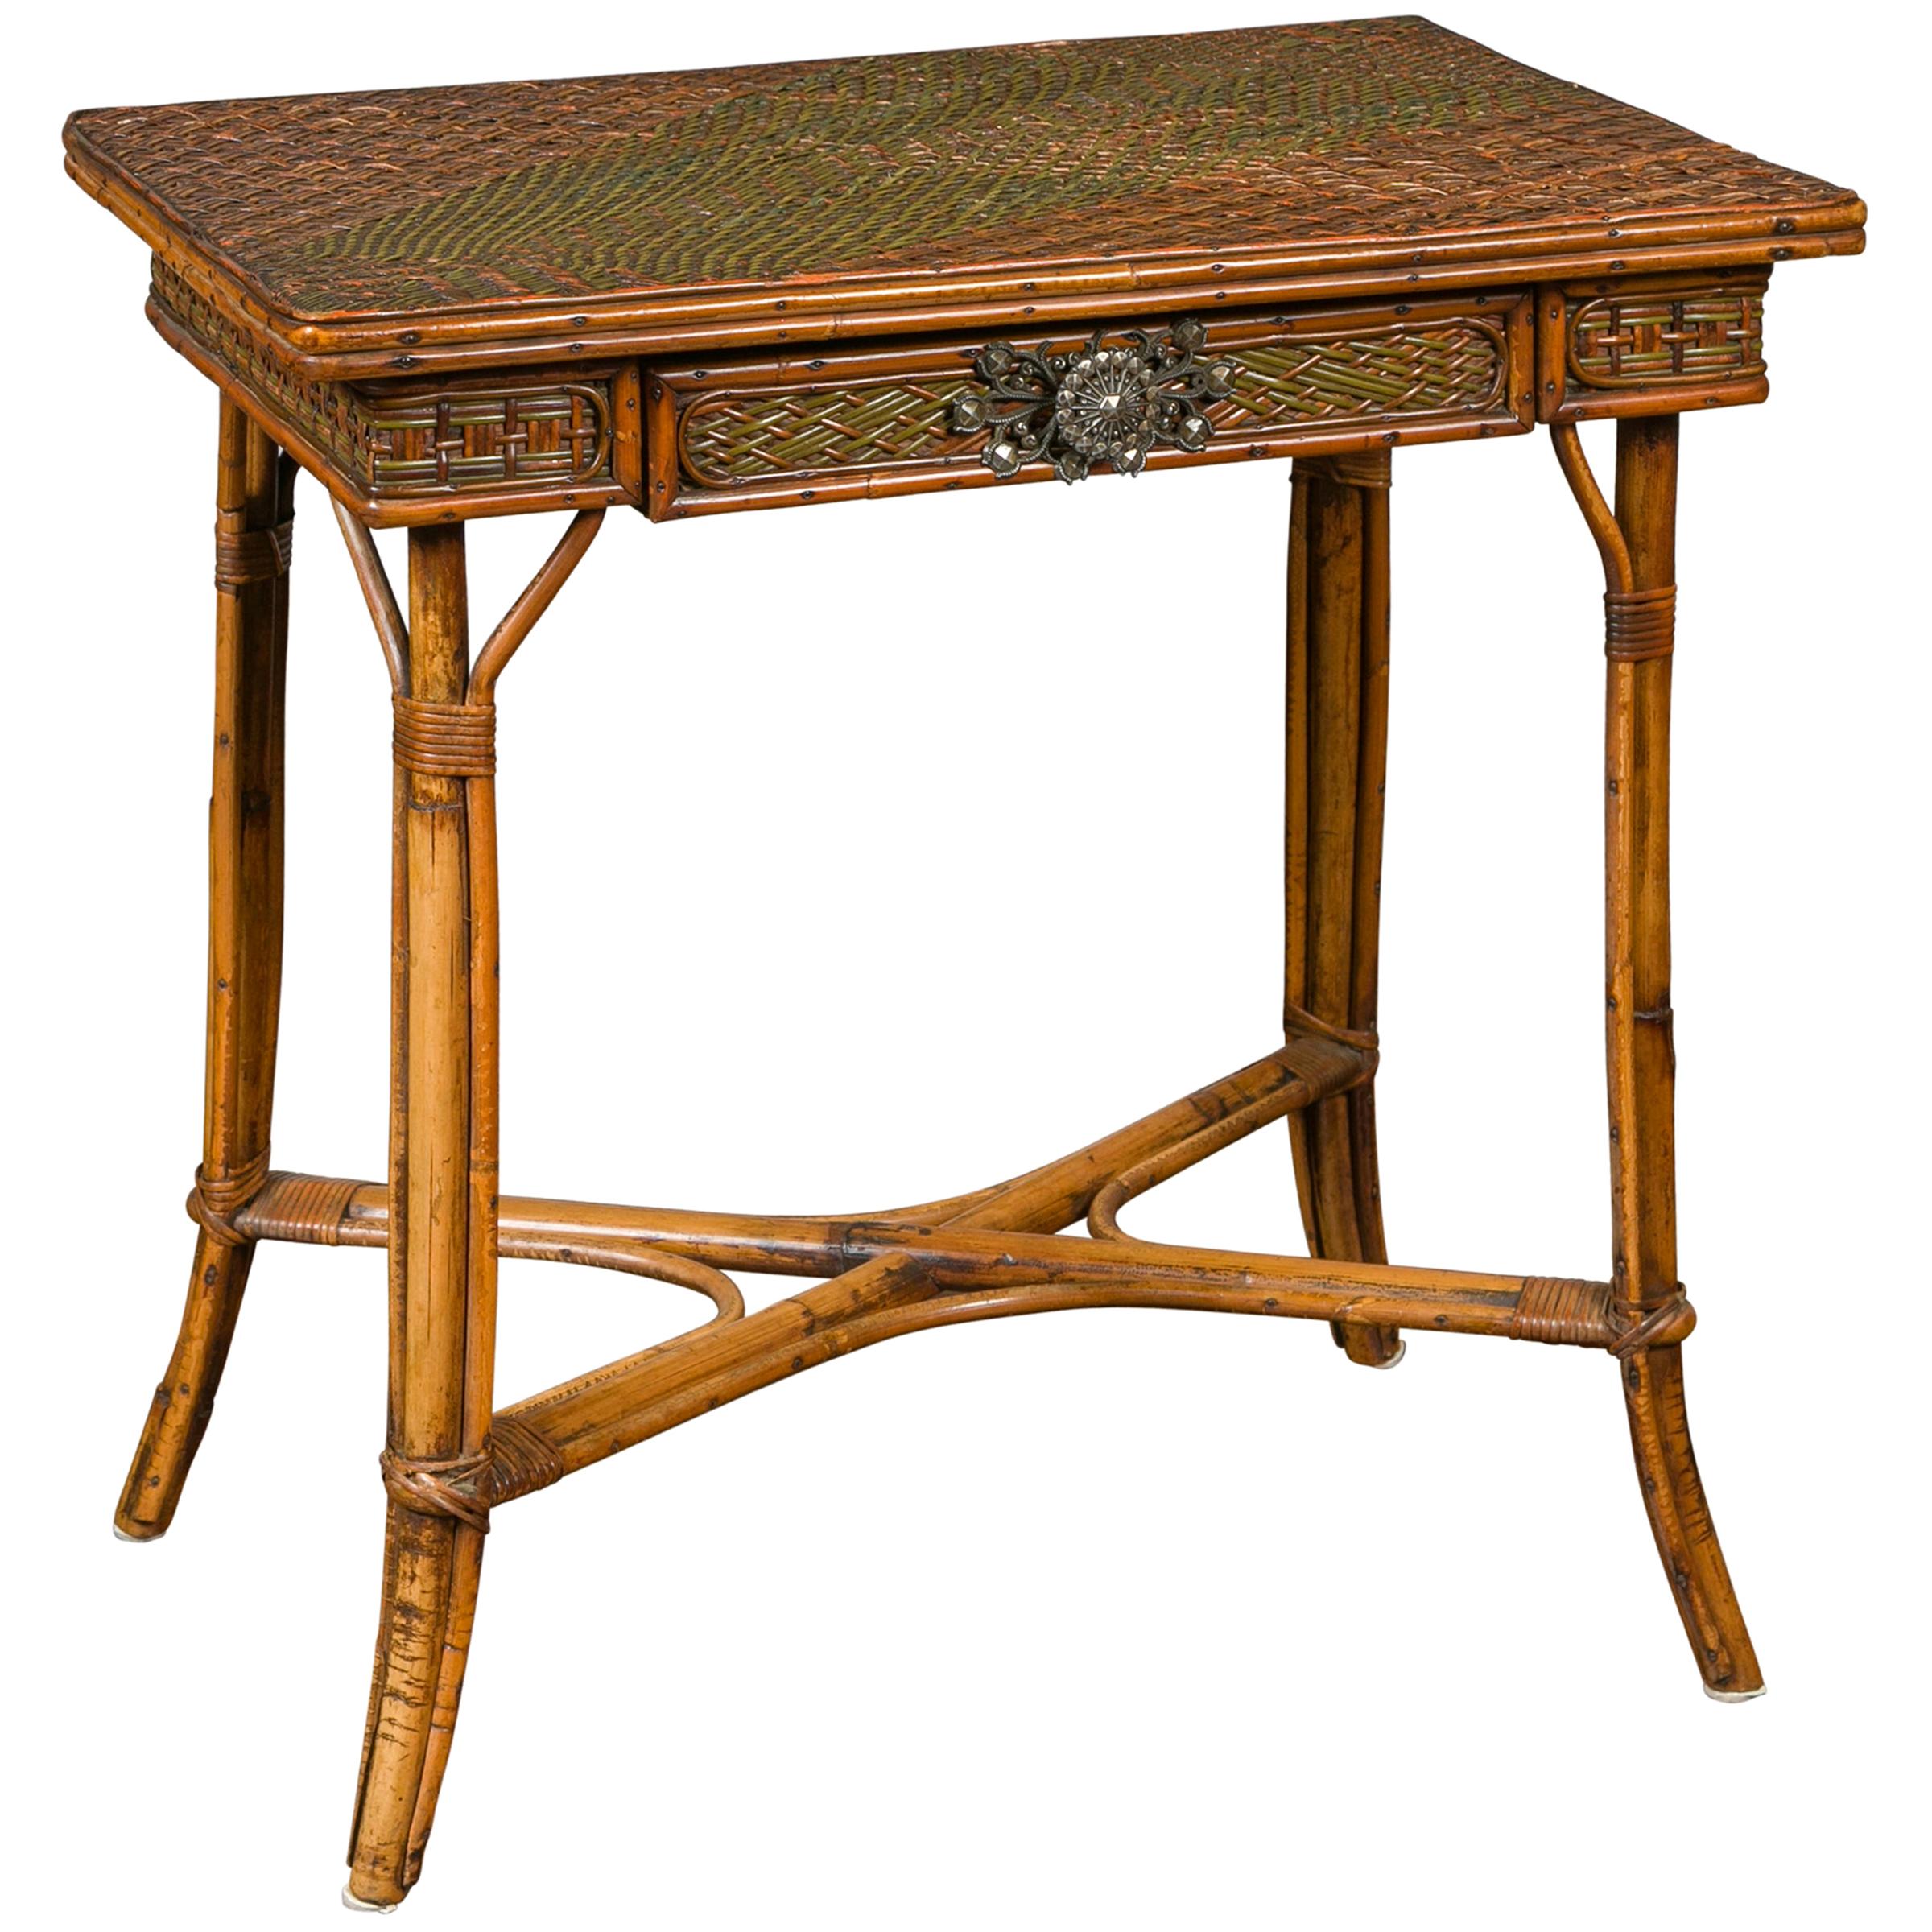 English 1900s Bamboo Side Table with Two-Toned Rattan Top and Ornate Hardware